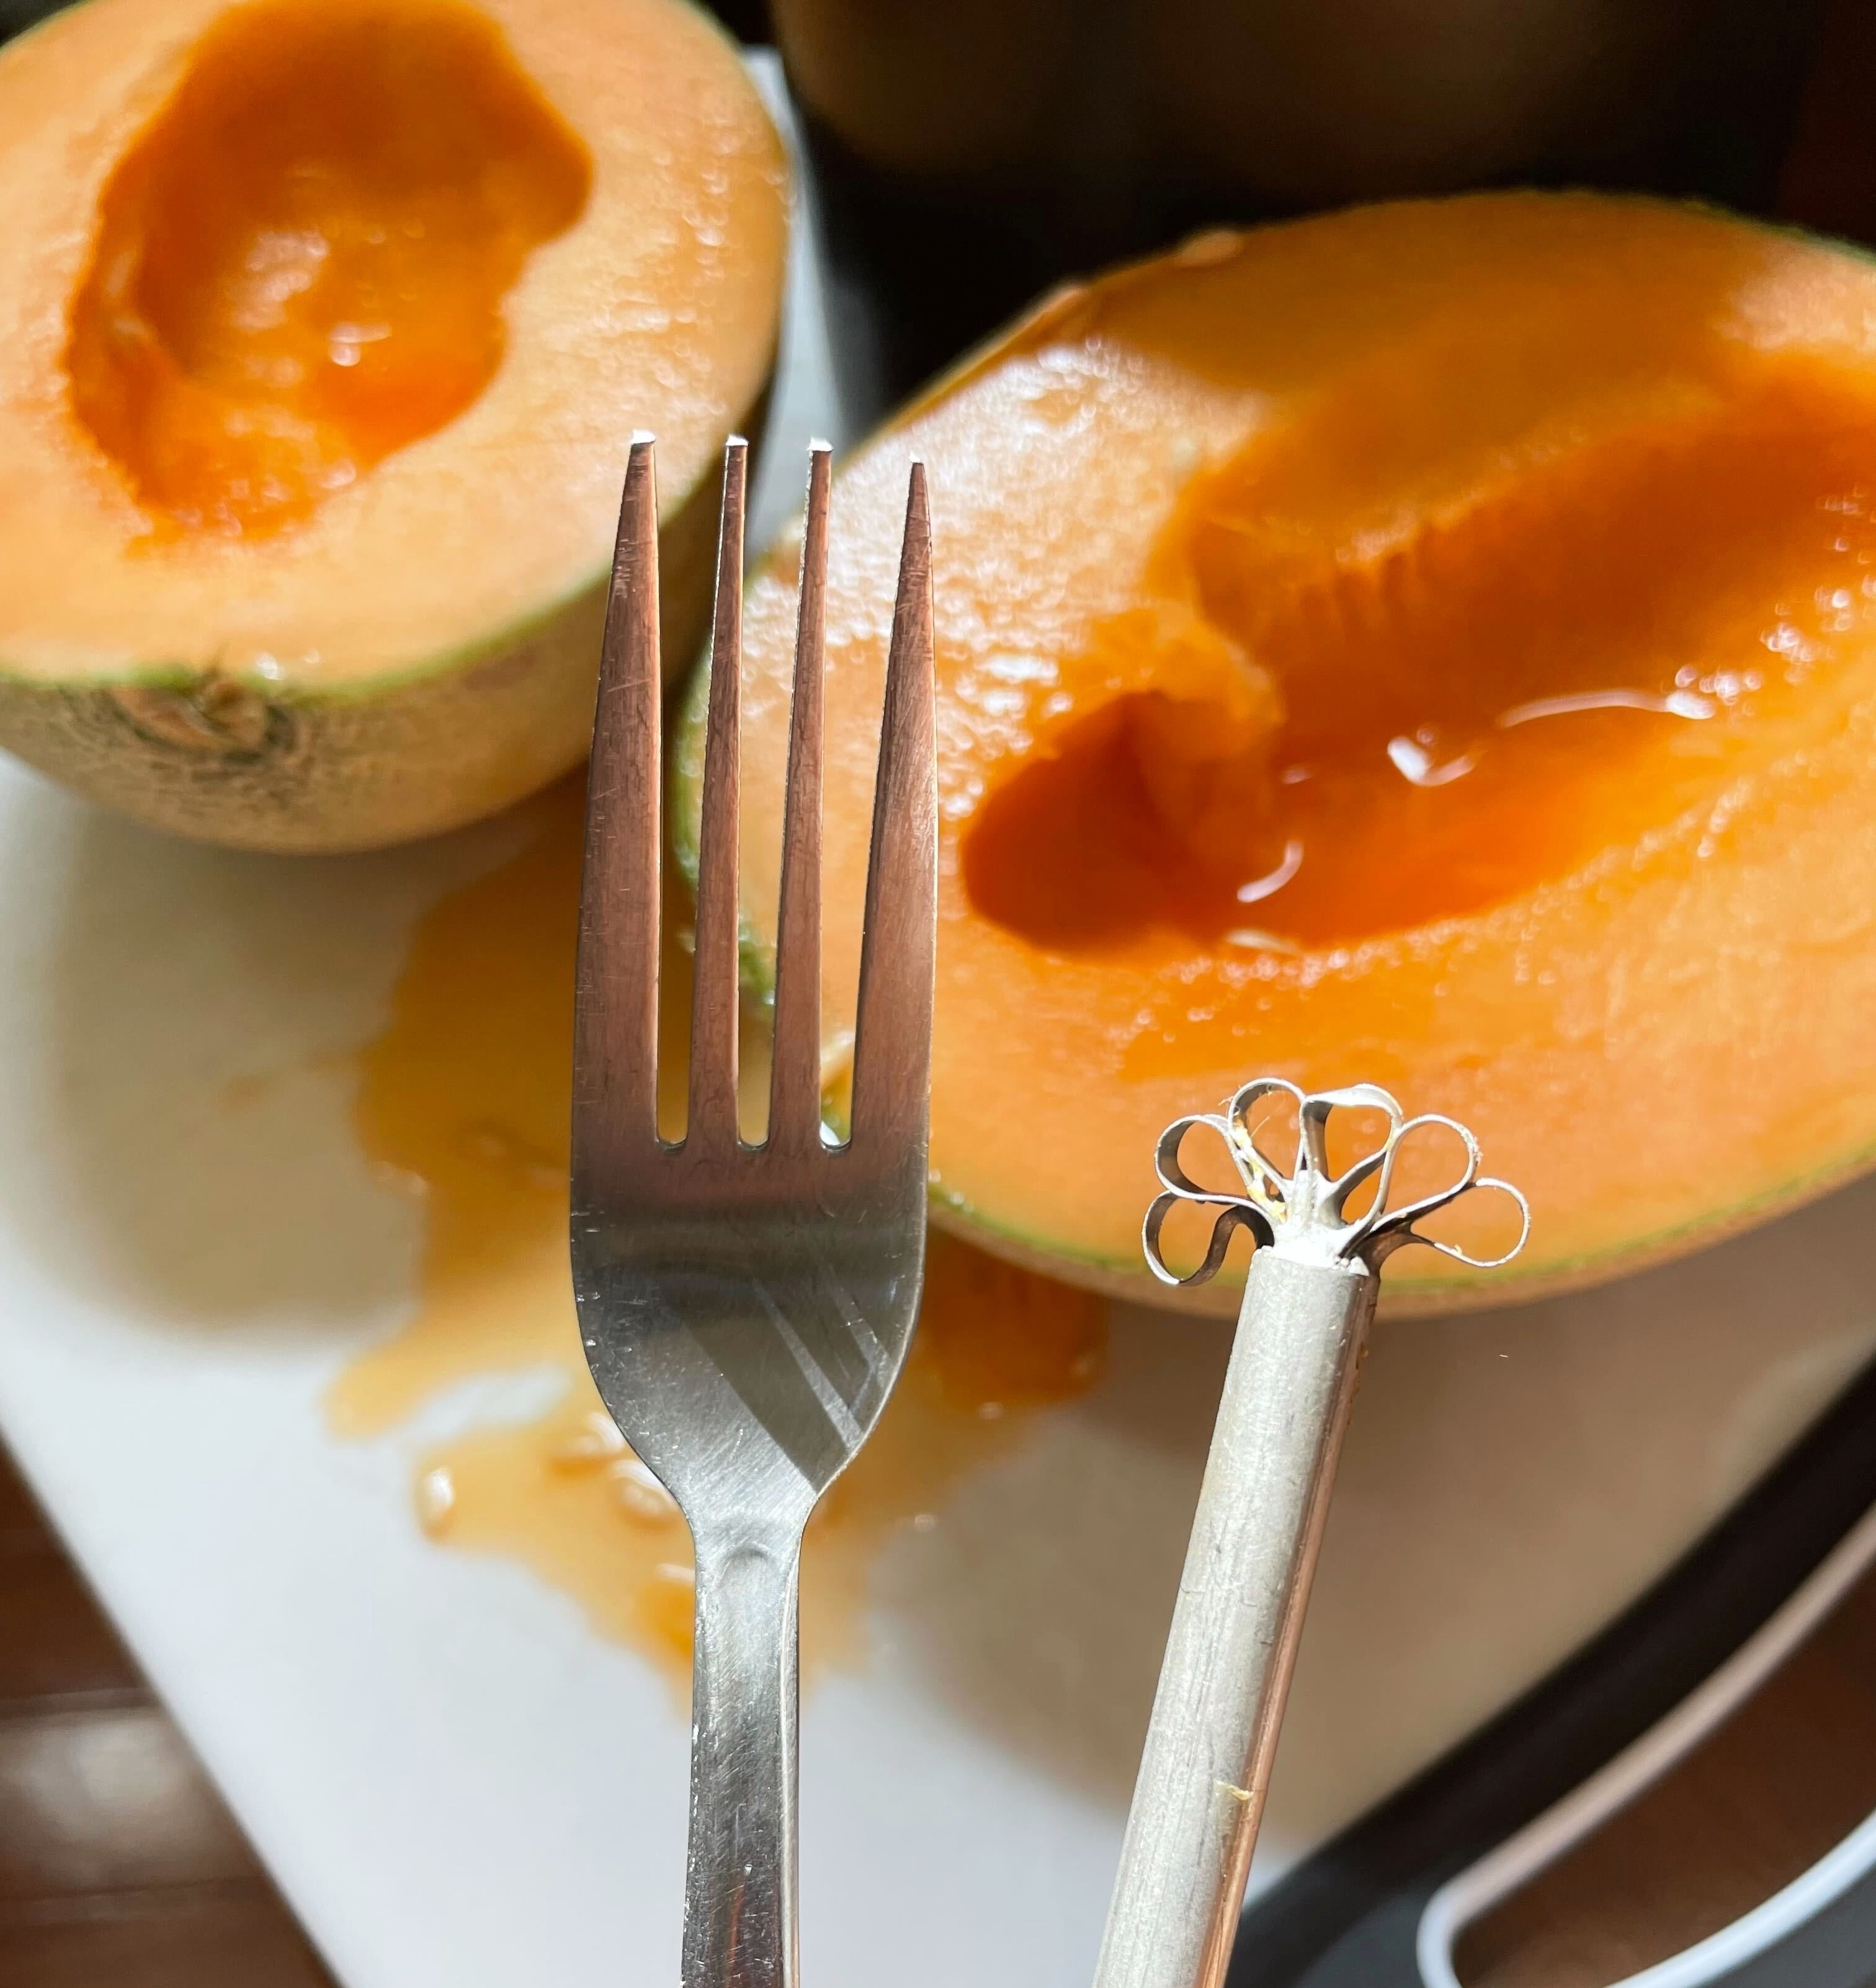 The author is holding up a fork and a melon grater above a cut cantaloupe on a plate